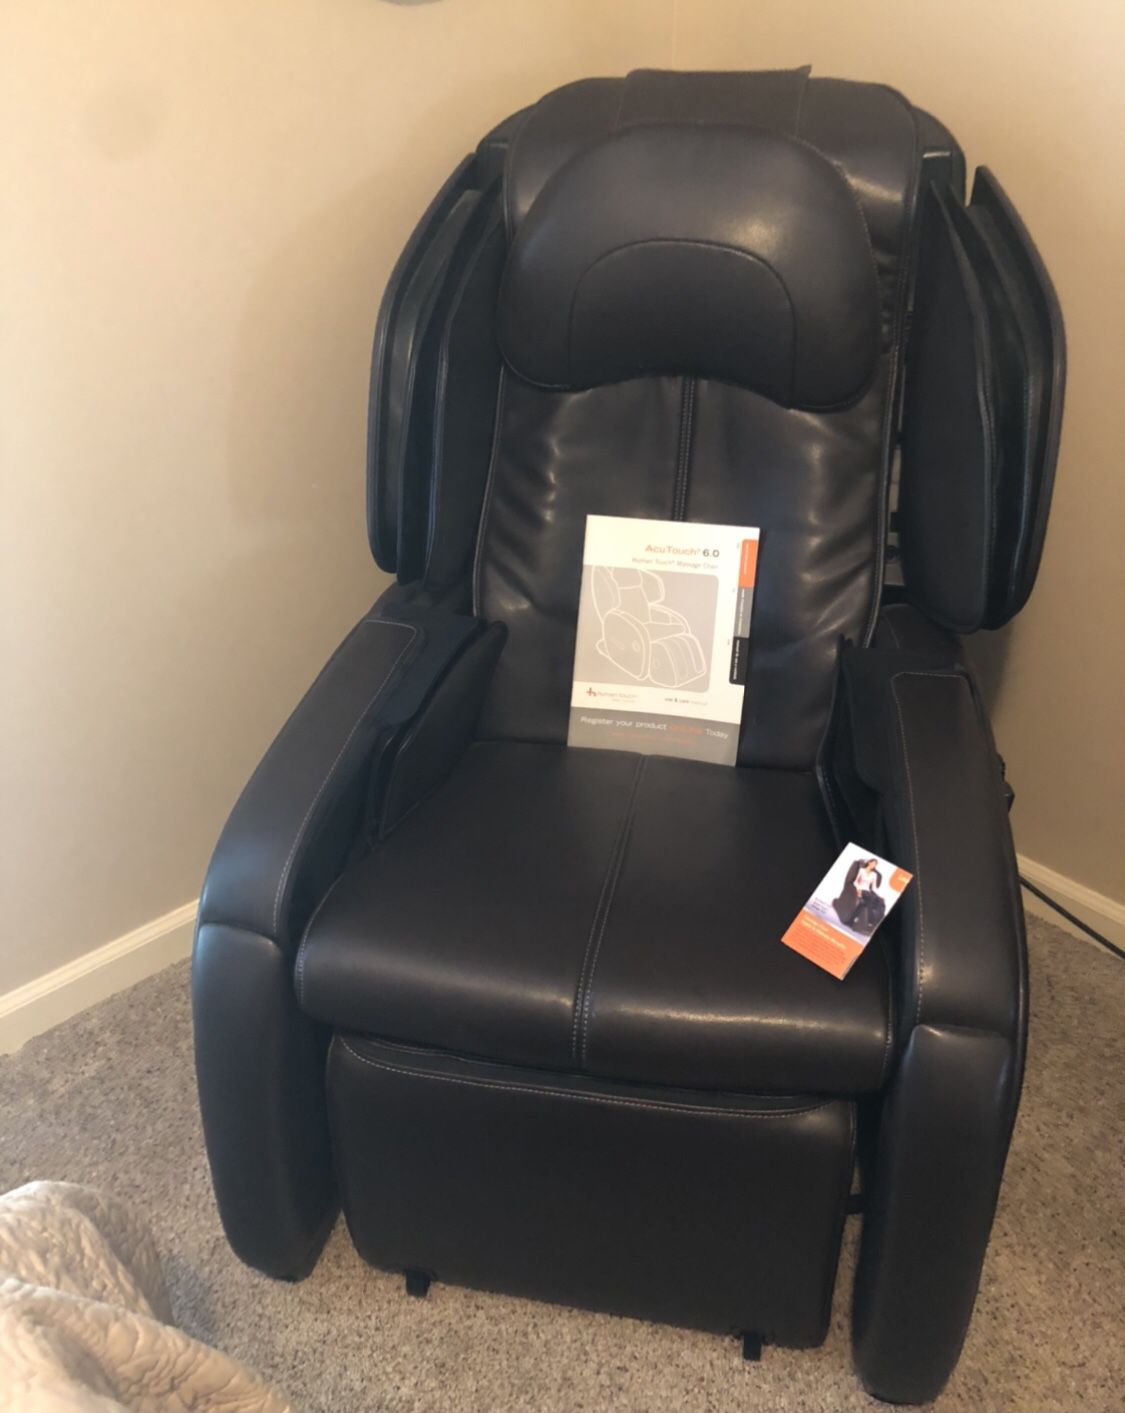 AcuTouch 6.0 Massage Chair